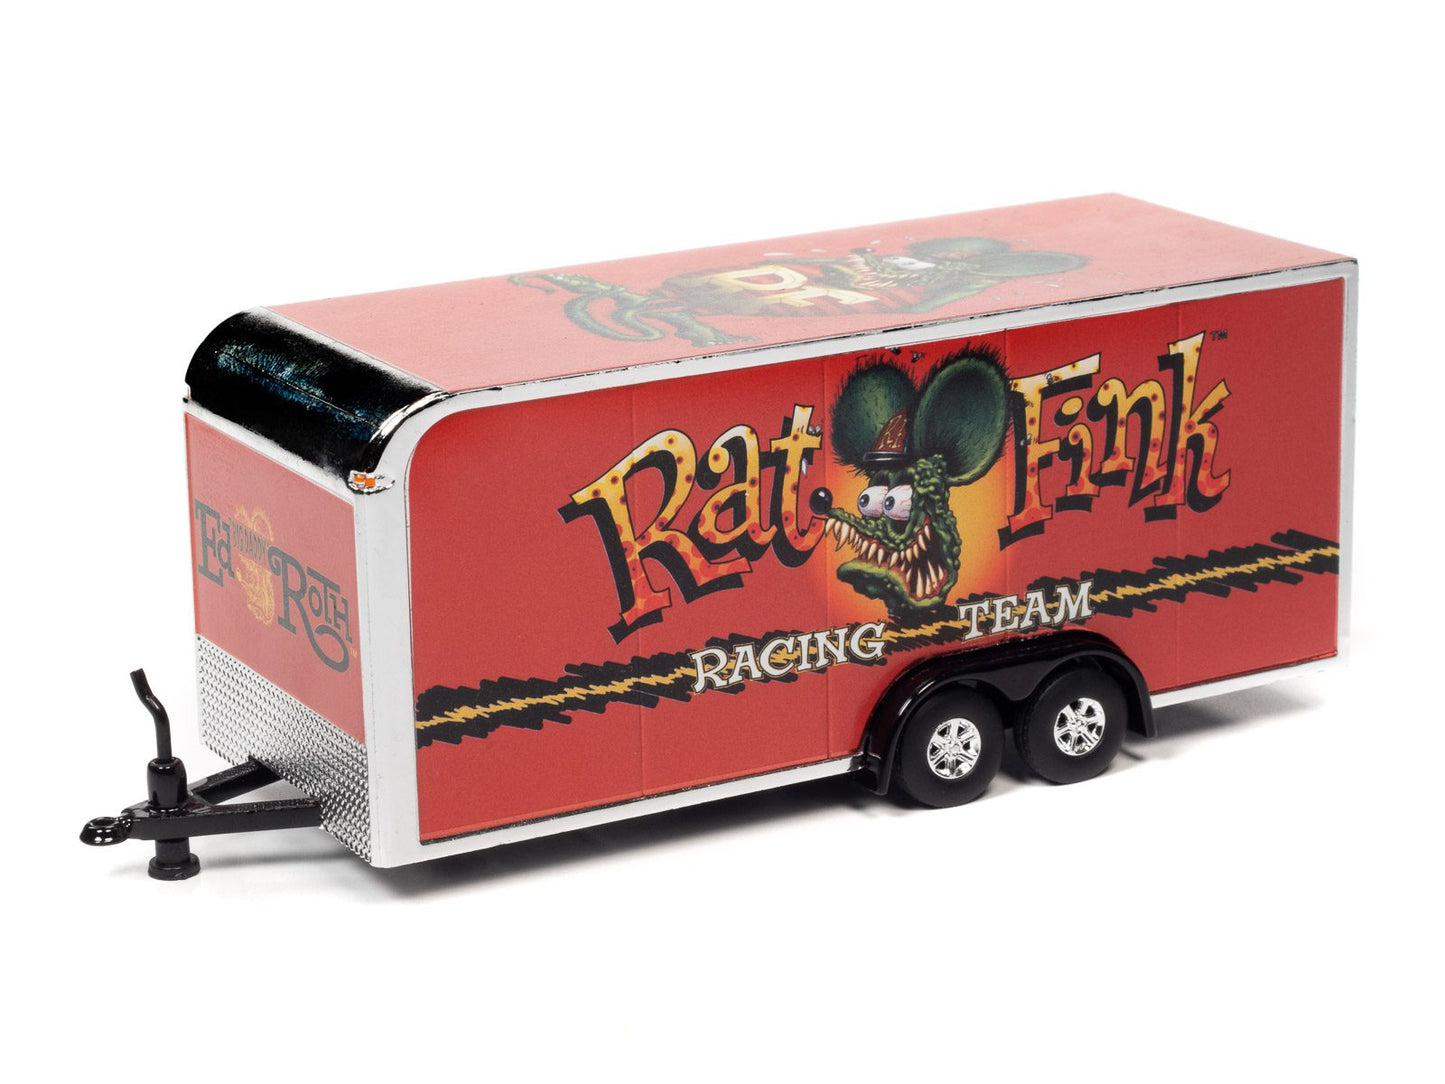 Auto World 1/64 Enclosed Trailer in Rat Fink Red